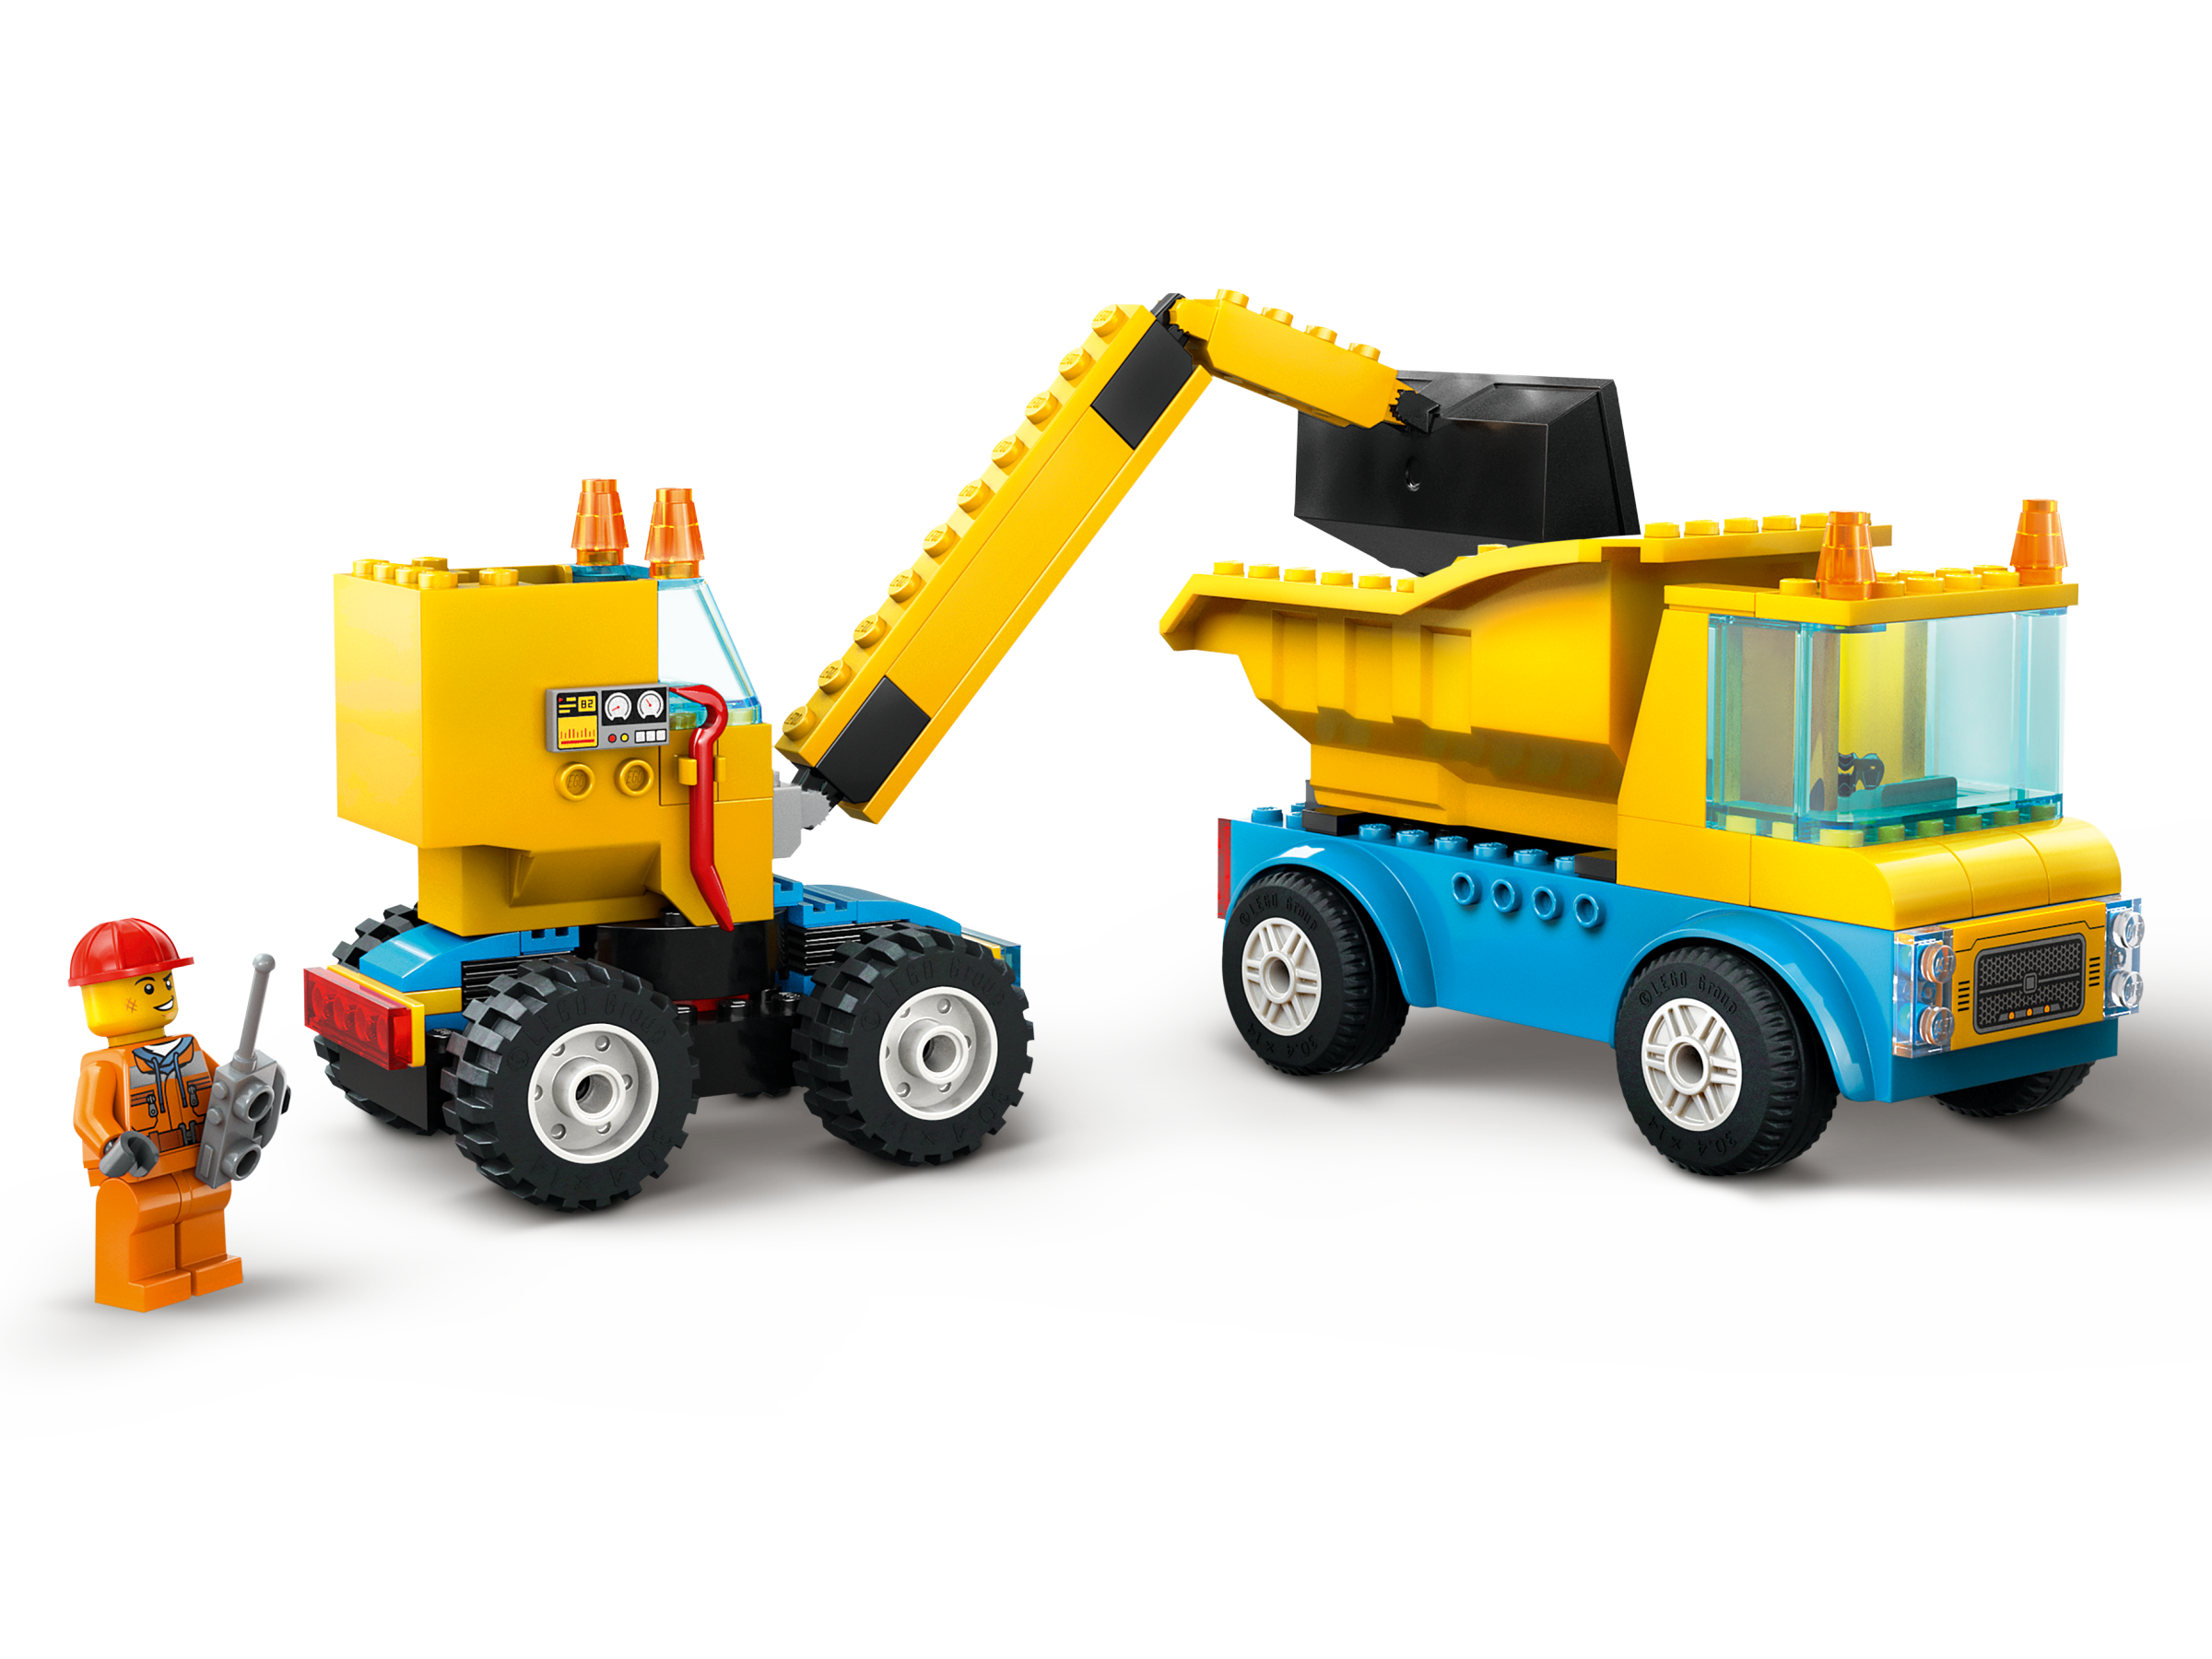 Fellow lade som om Sodavand Construction Trucks and Wrecking Ball Crane 60391 | City | Buy online at  the Official LEGO® Shop US